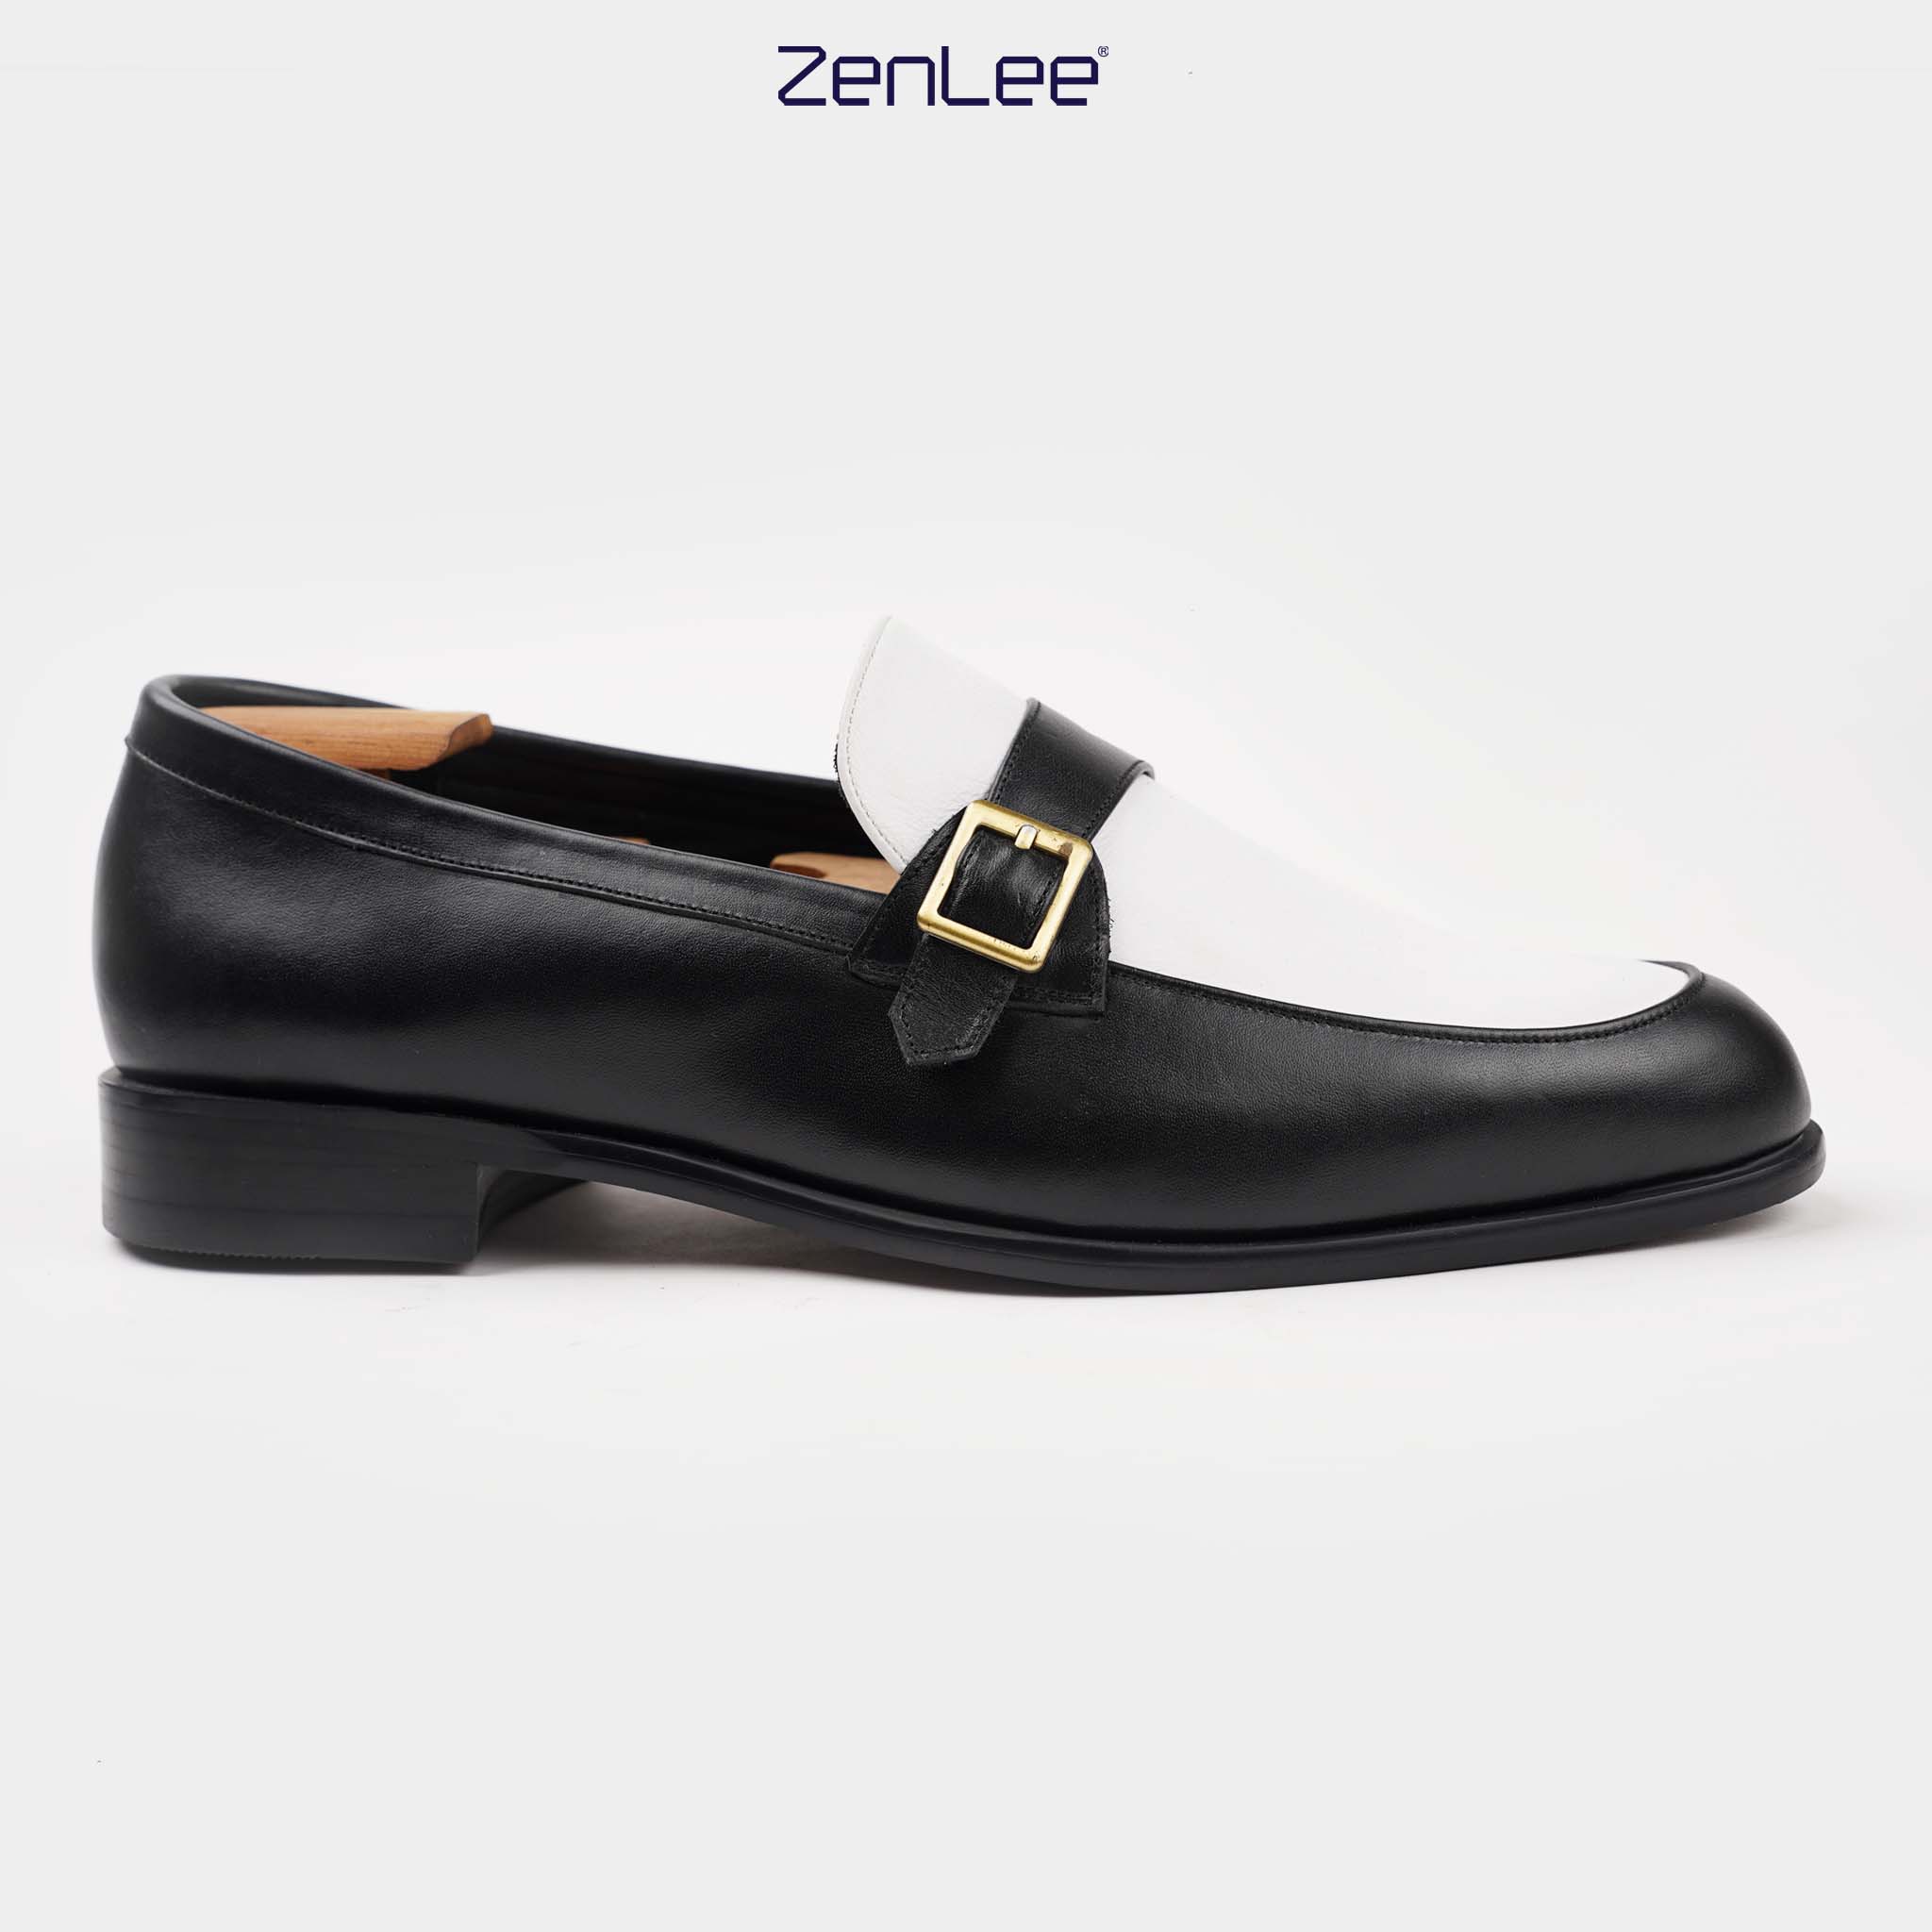 TASSEL LOAFER WITH BUCKLE